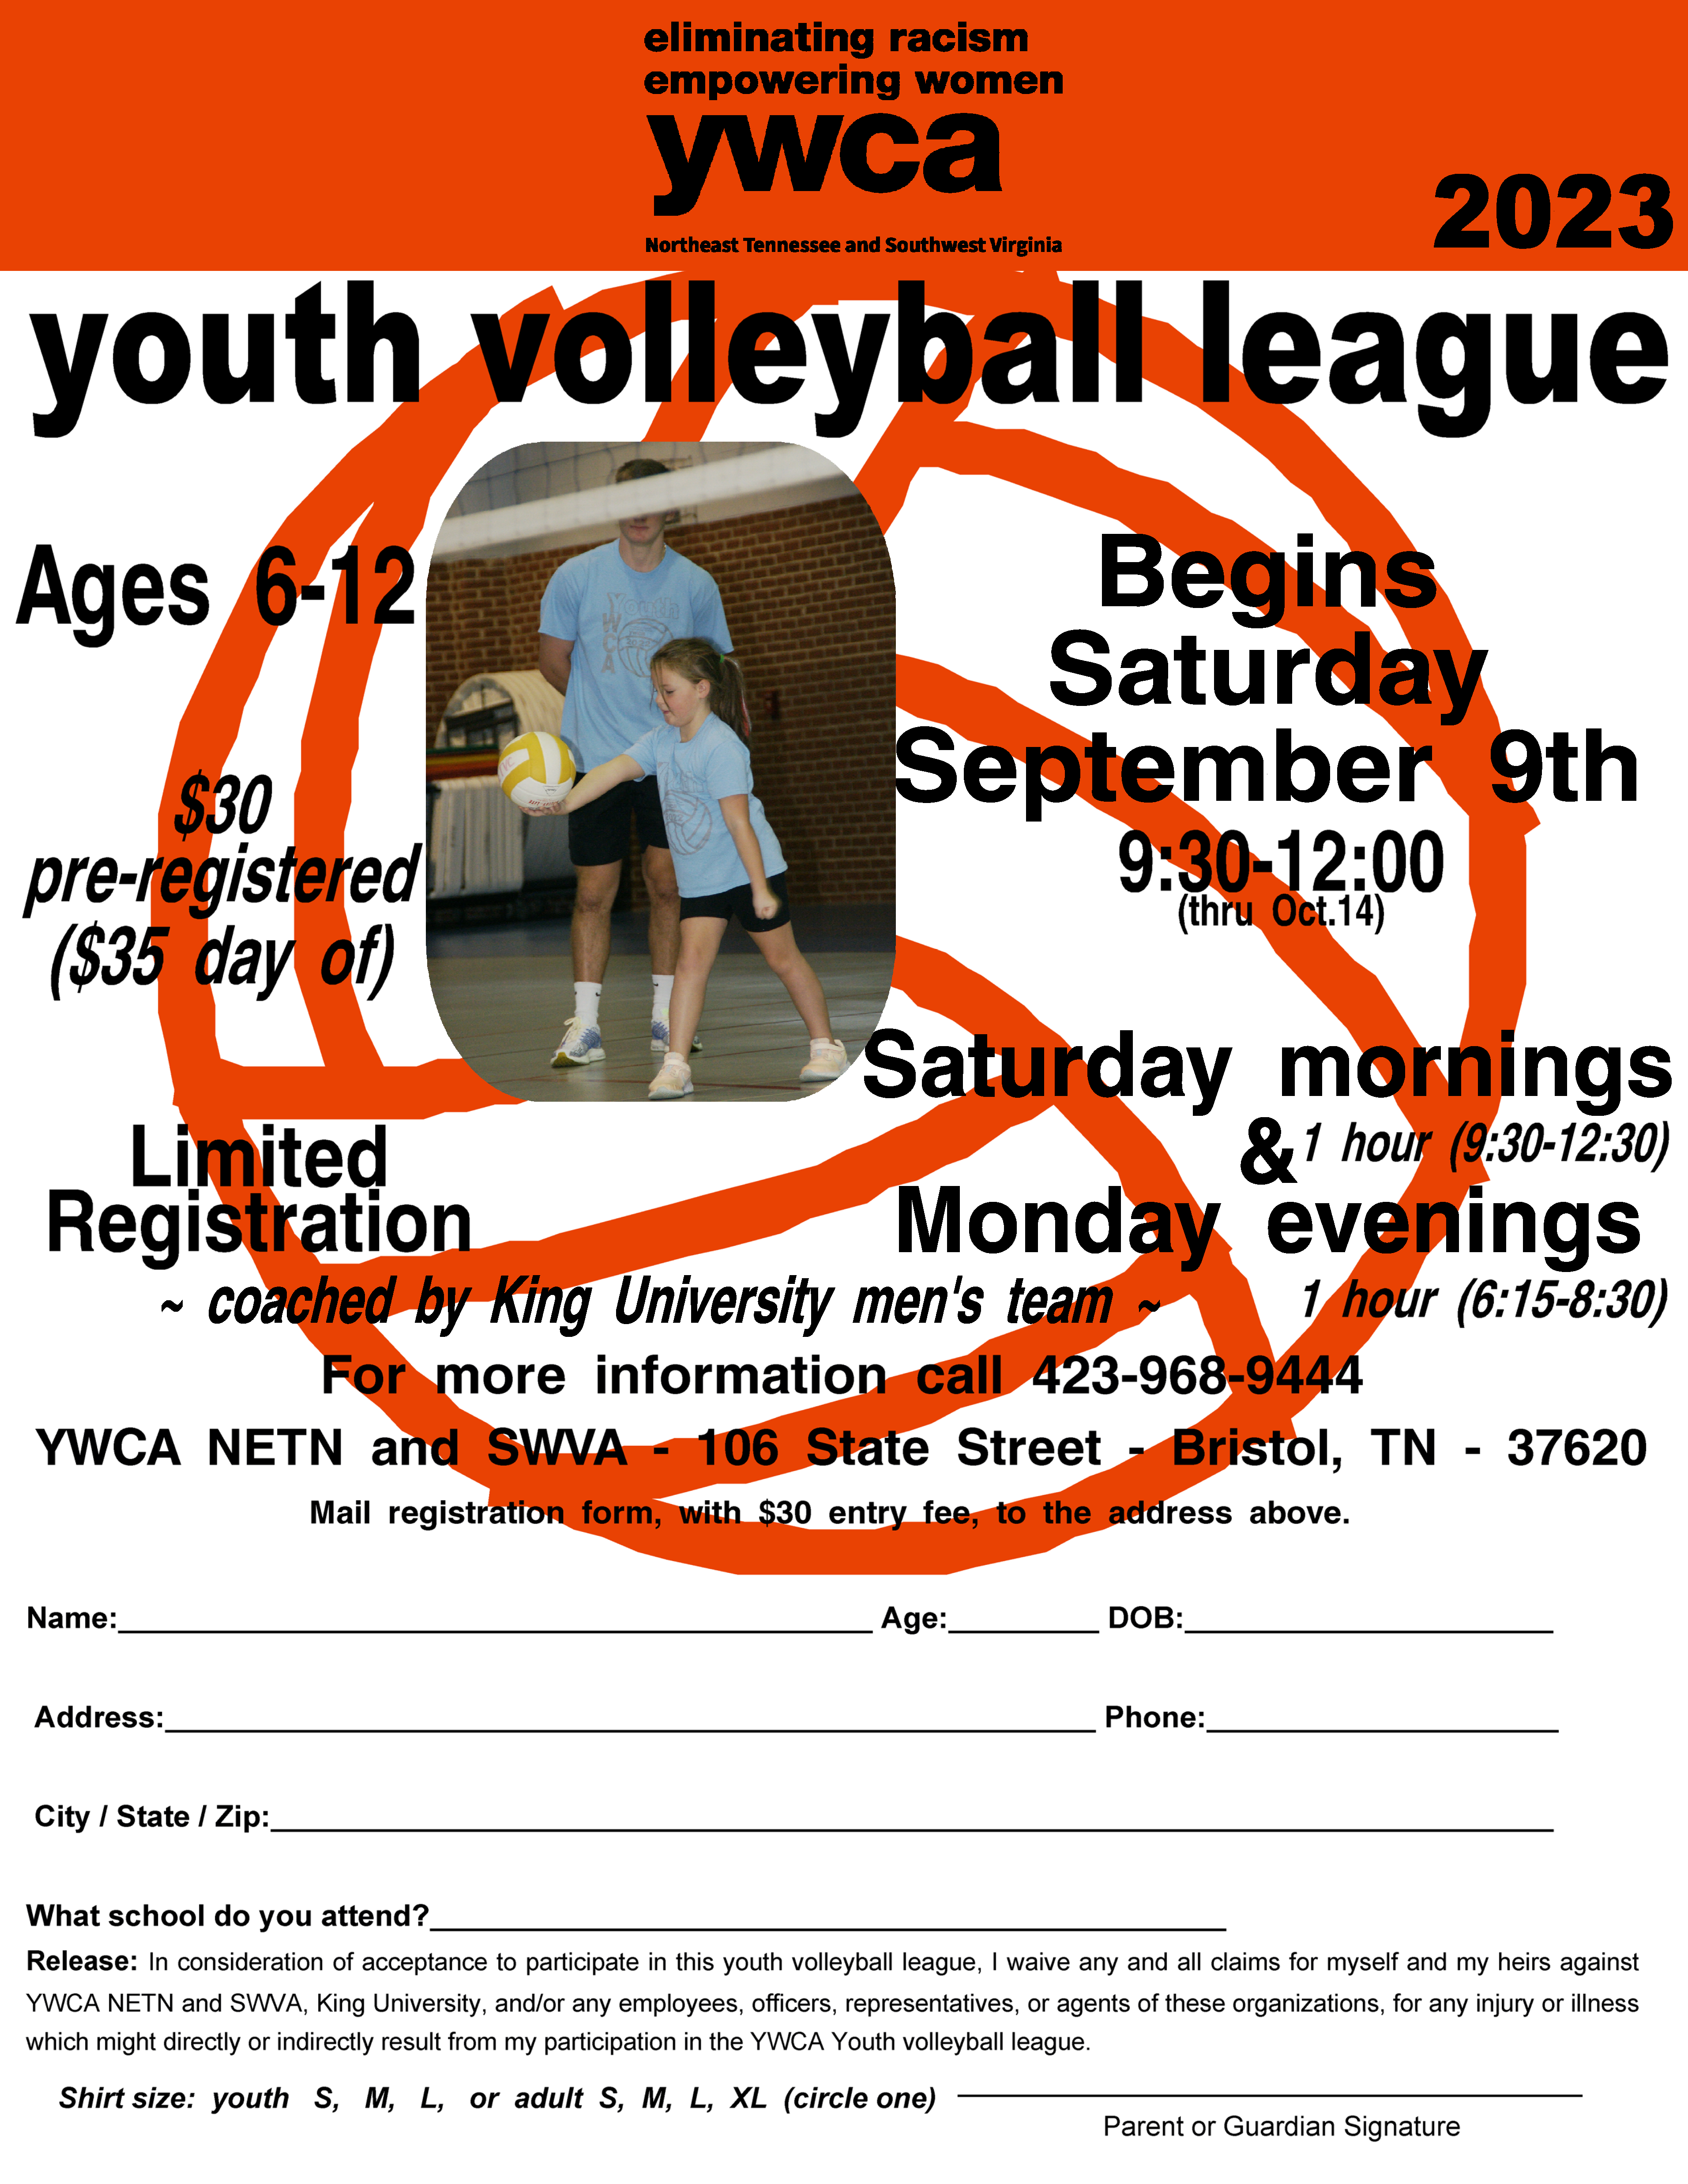 youth league flyer 23